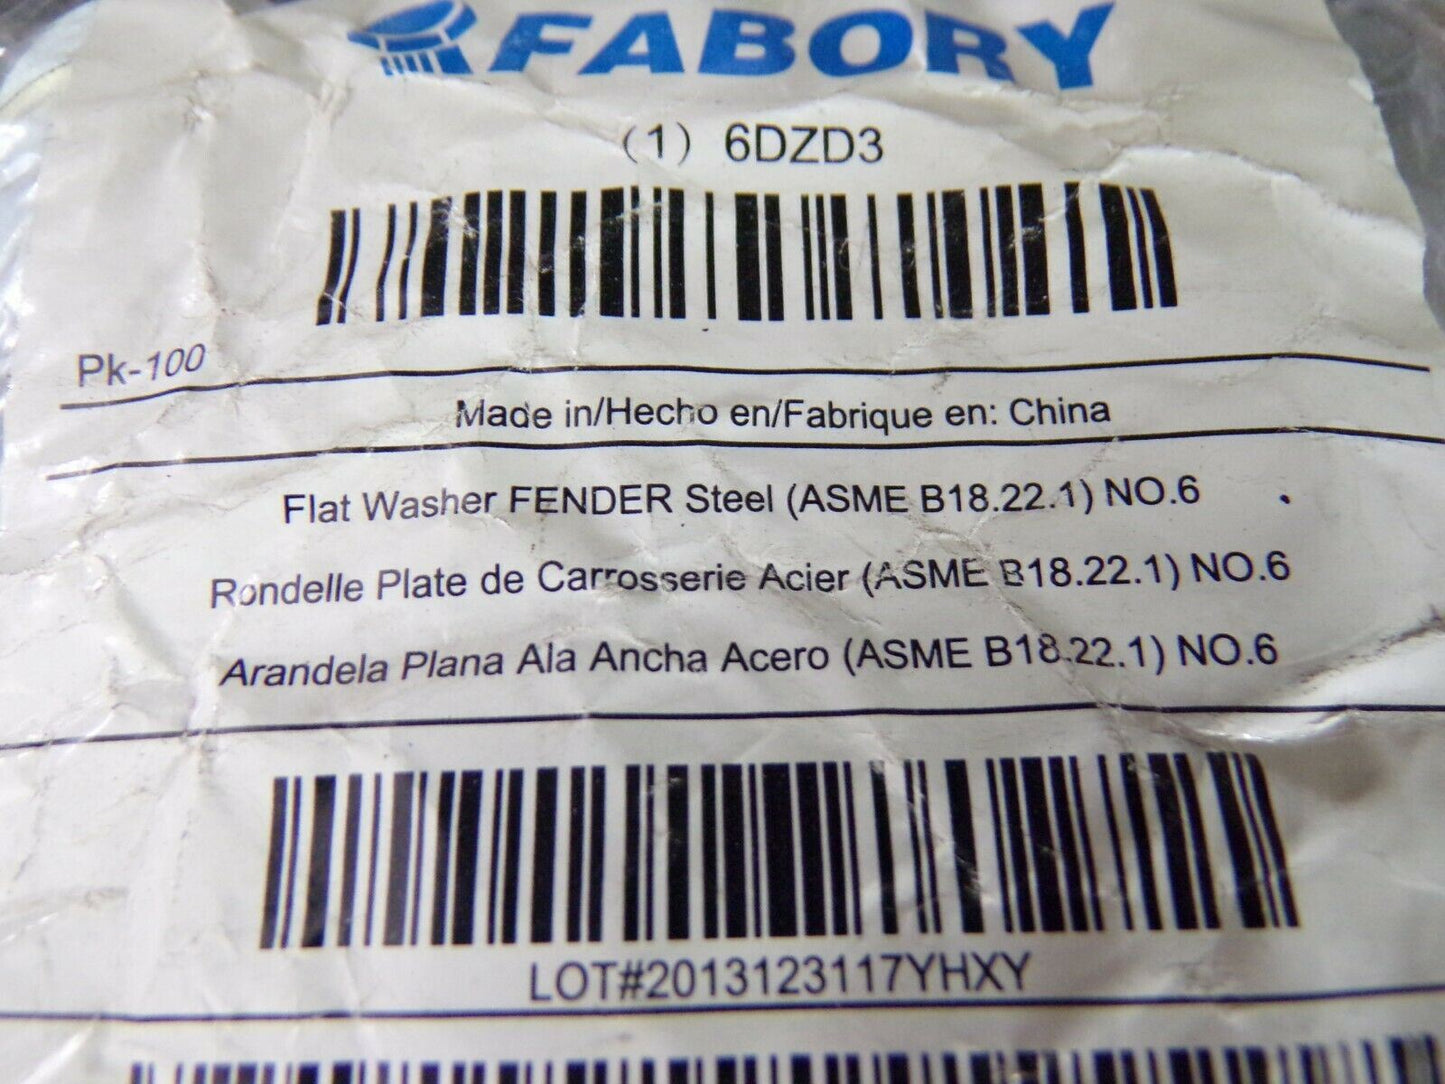 Fabory No. 6 Fender Washer Zinc Plated Steel 100pk (183851956597-NBT32)